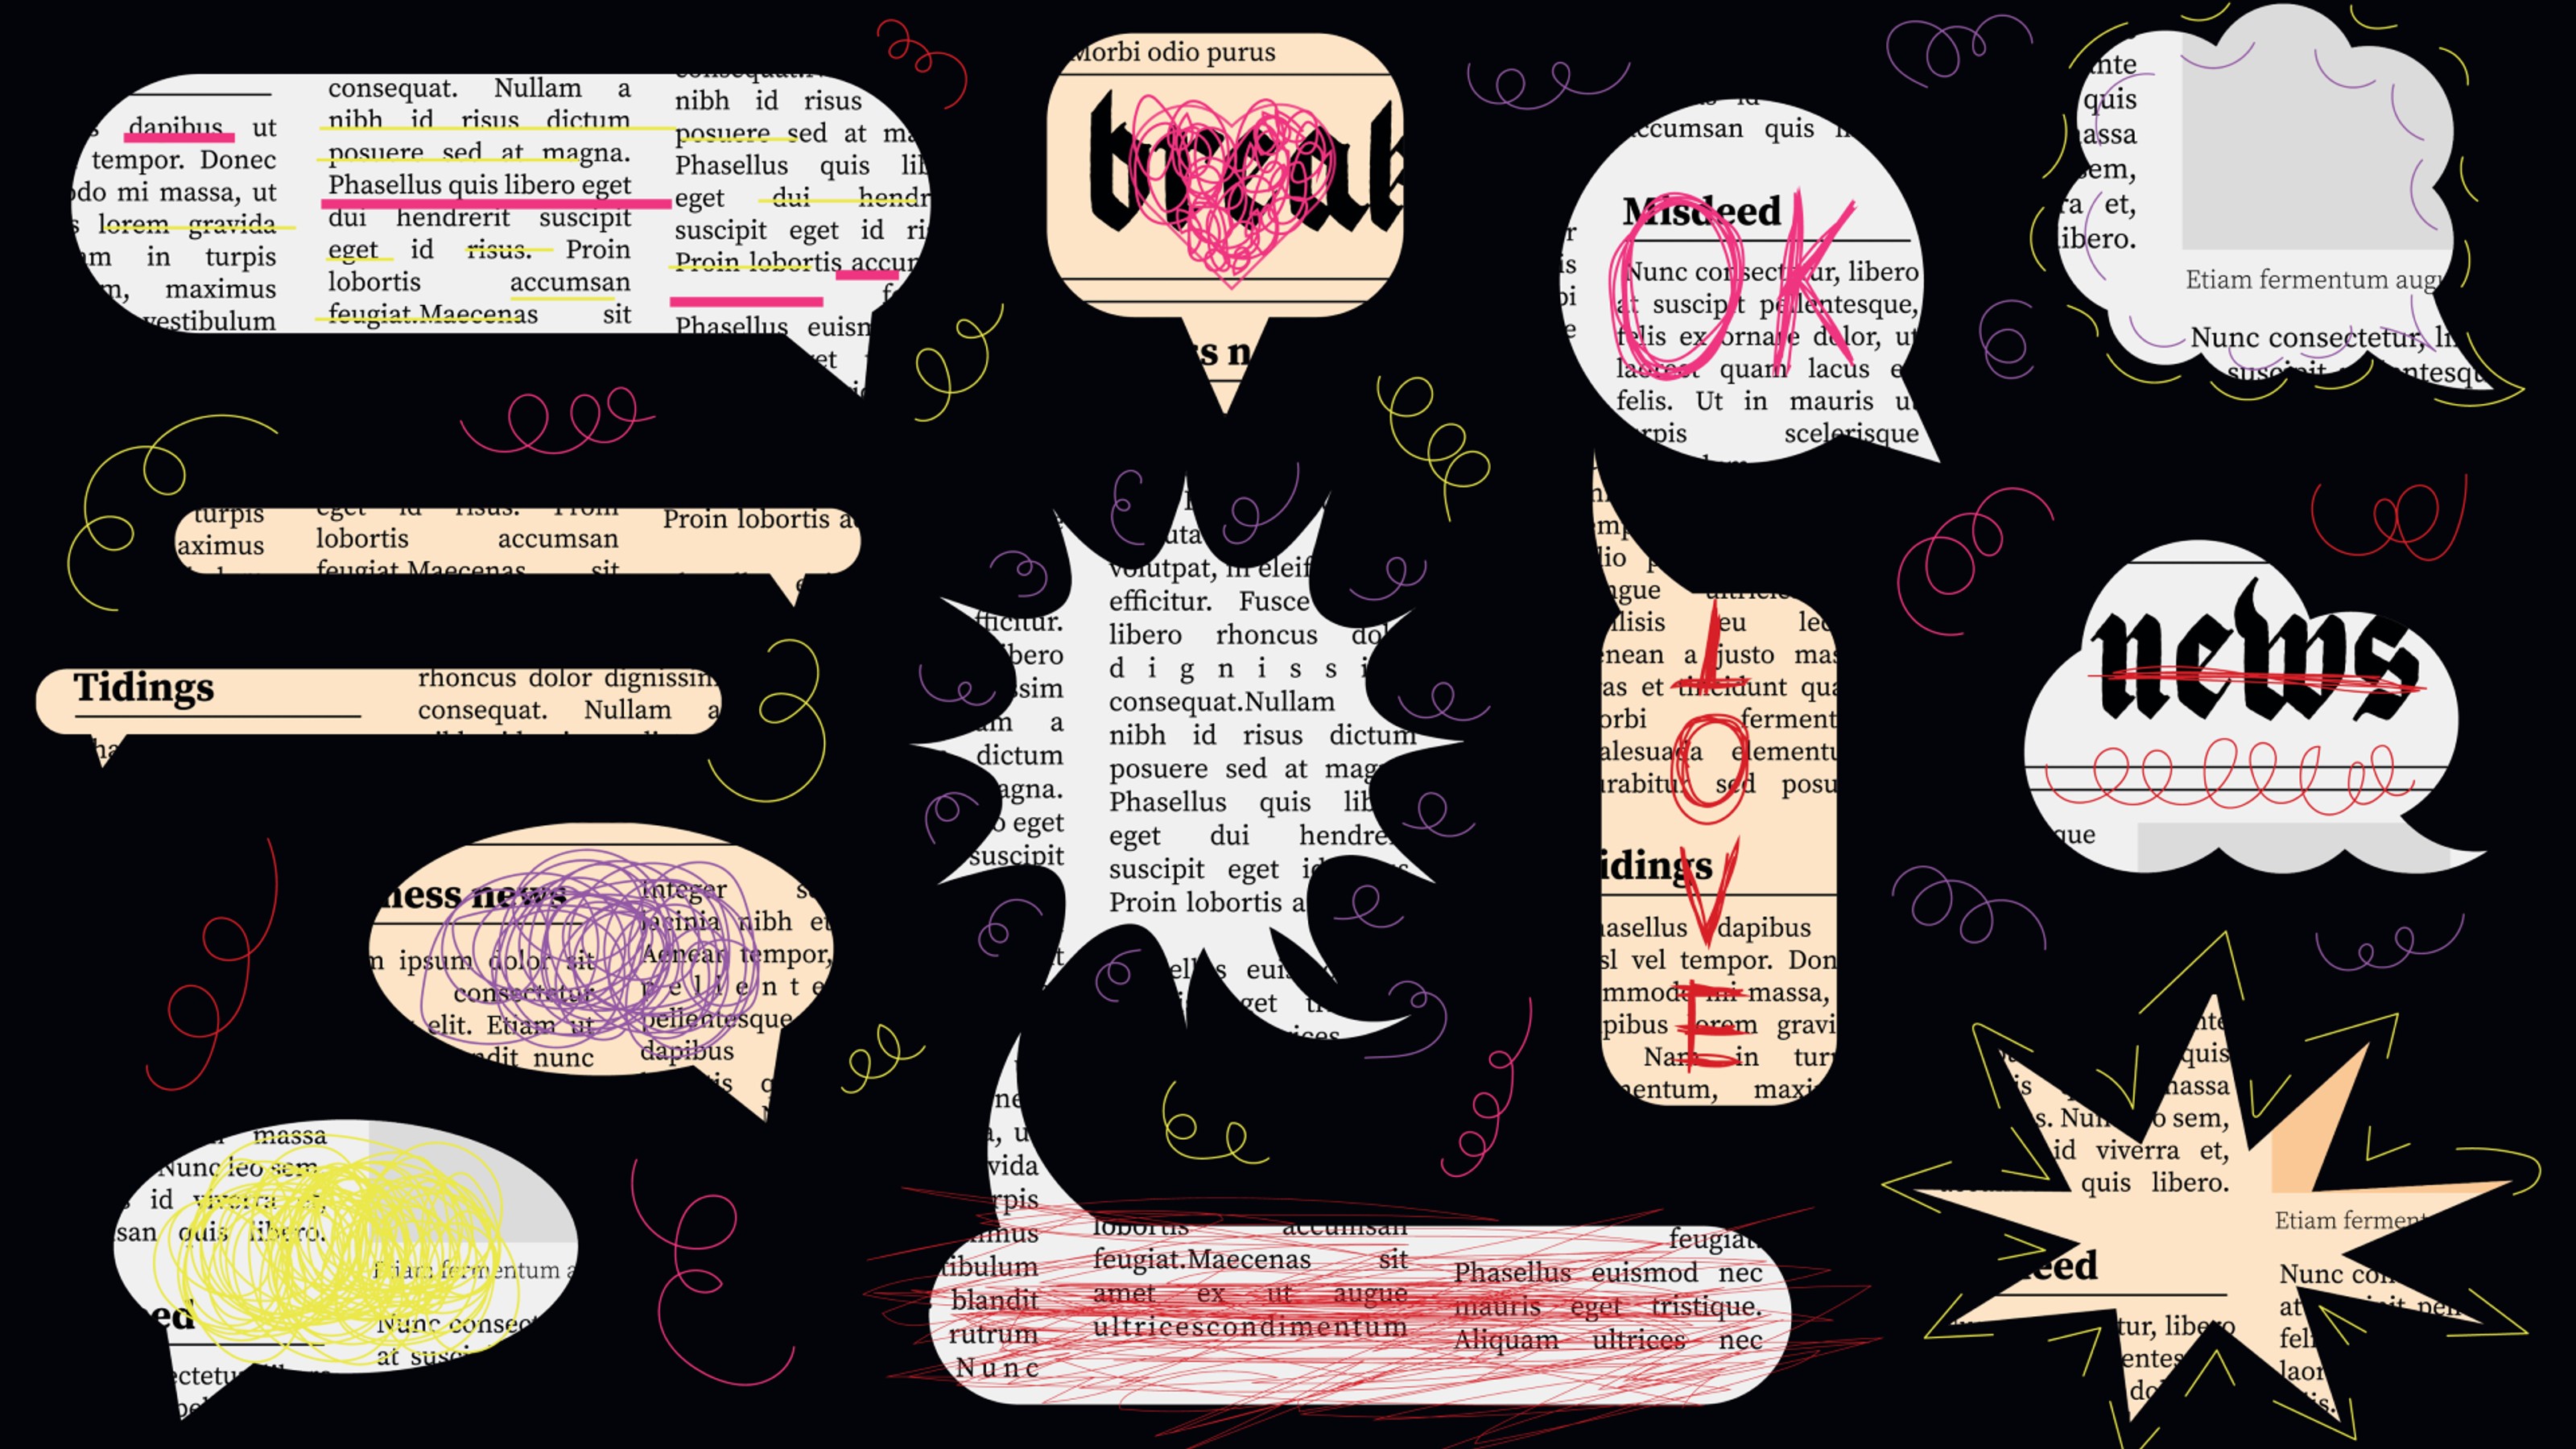 A collage of speech bubbles containing randomly oriented text, scribbles, and abstract shapes on a black background. Some bubbles feature words like "news" and "missed" partially visible.